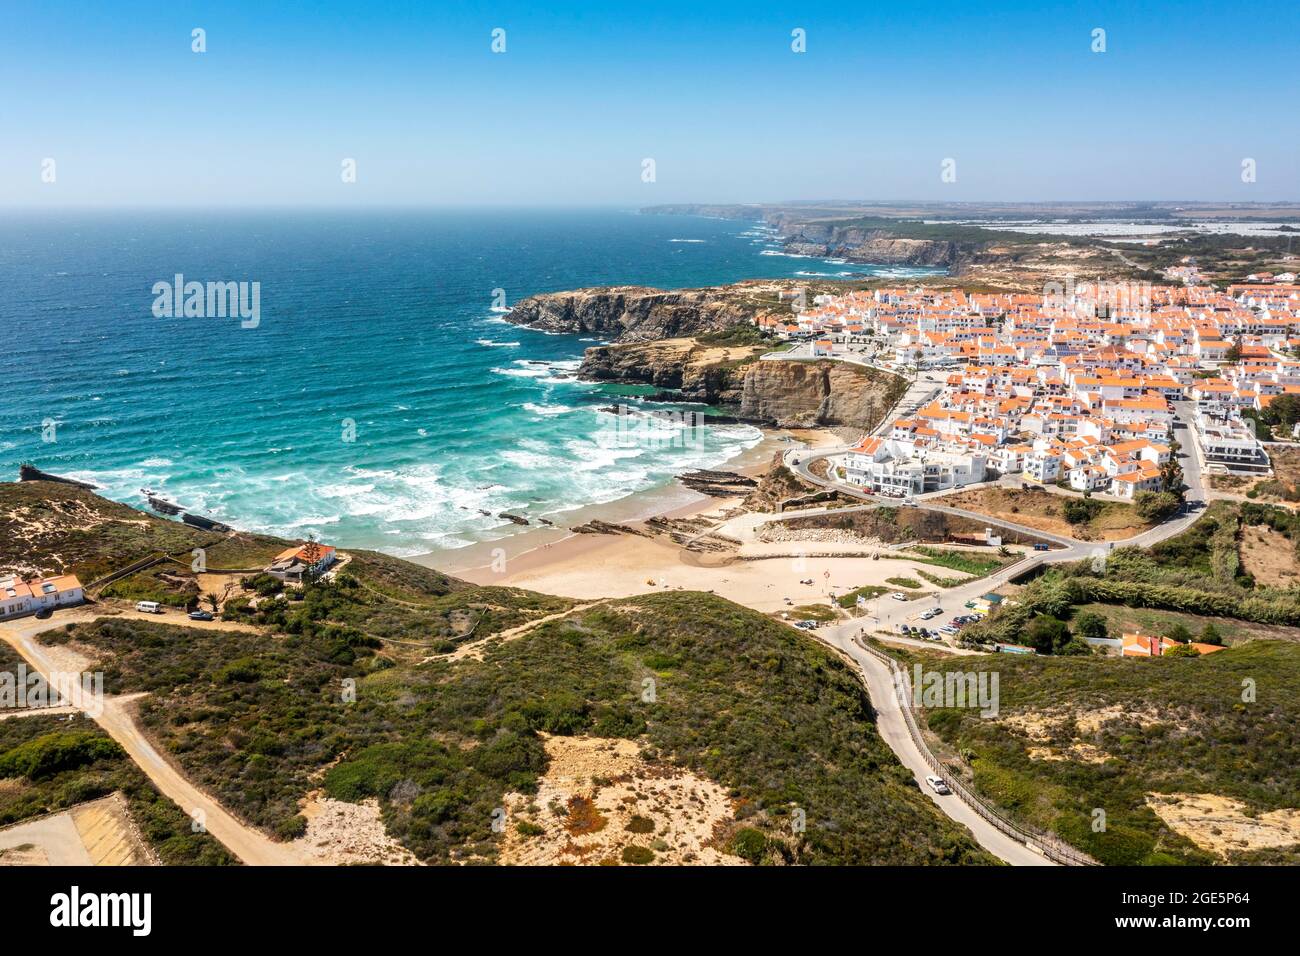 Aerial view of Zambujeira do Mar, a town on cliffs by the Atlantic Ocean in Alentejo, Portugal Stock Photo